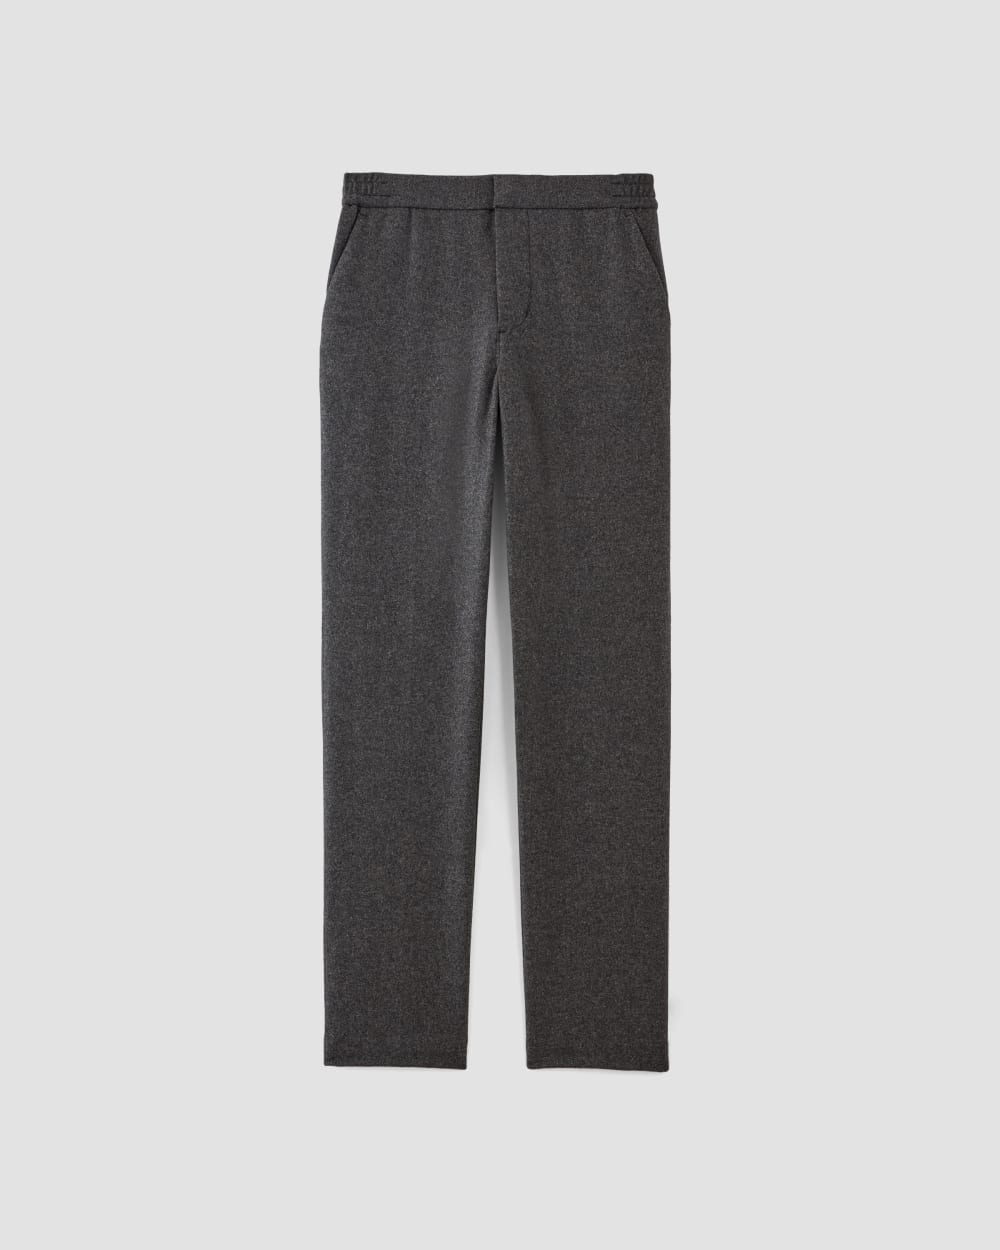 The Wool Flannel Pant